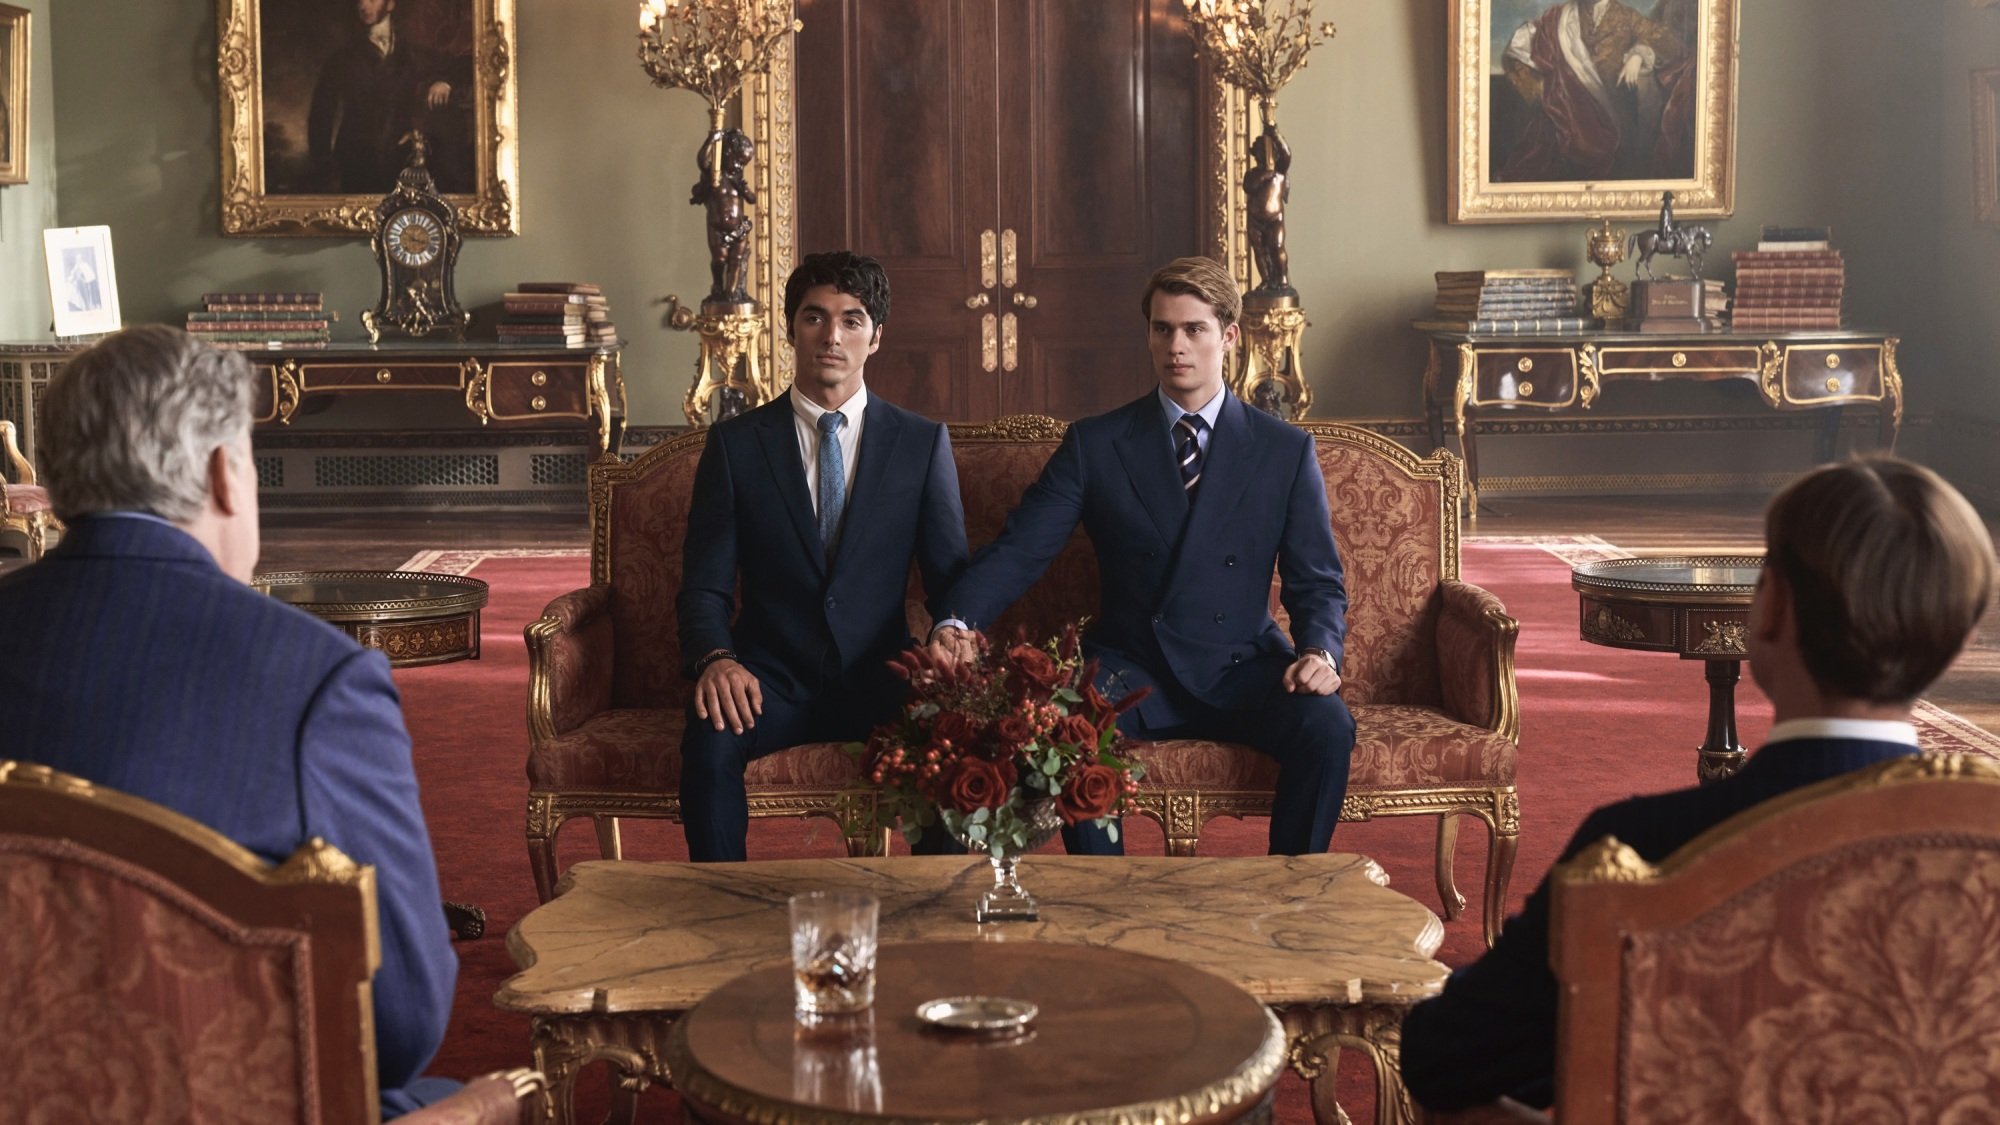 Two men in suits hold hands while seated on a red couch in Buckingham Palace.